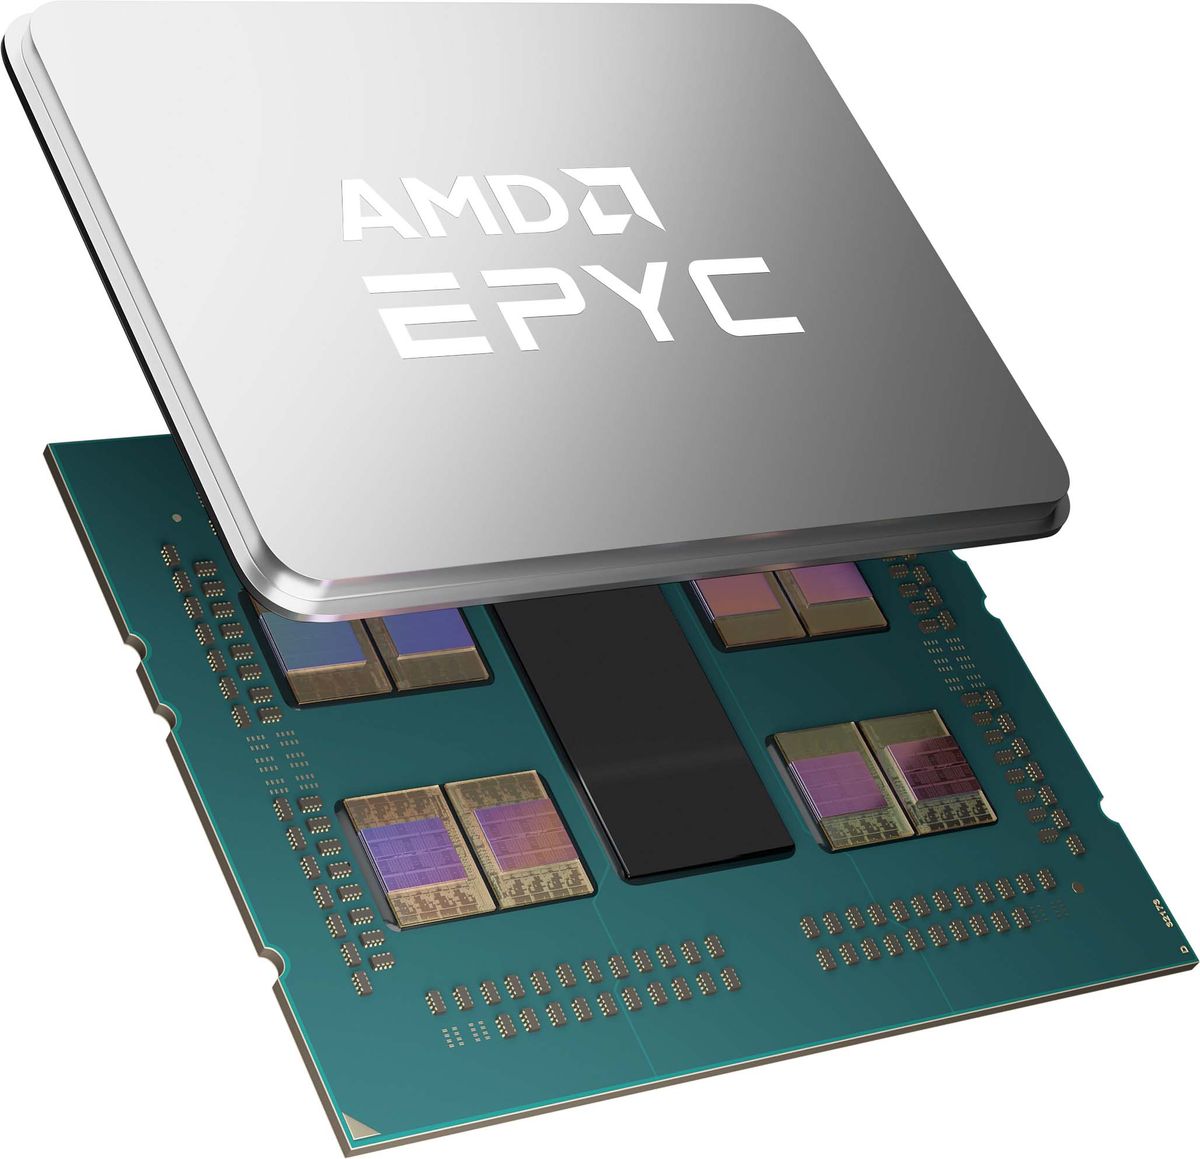 AMD’s EPYC Milan-X is Official: 3D V-Cache Brings Up To 768MB of L3 Cache, 64 Cores (Updated)